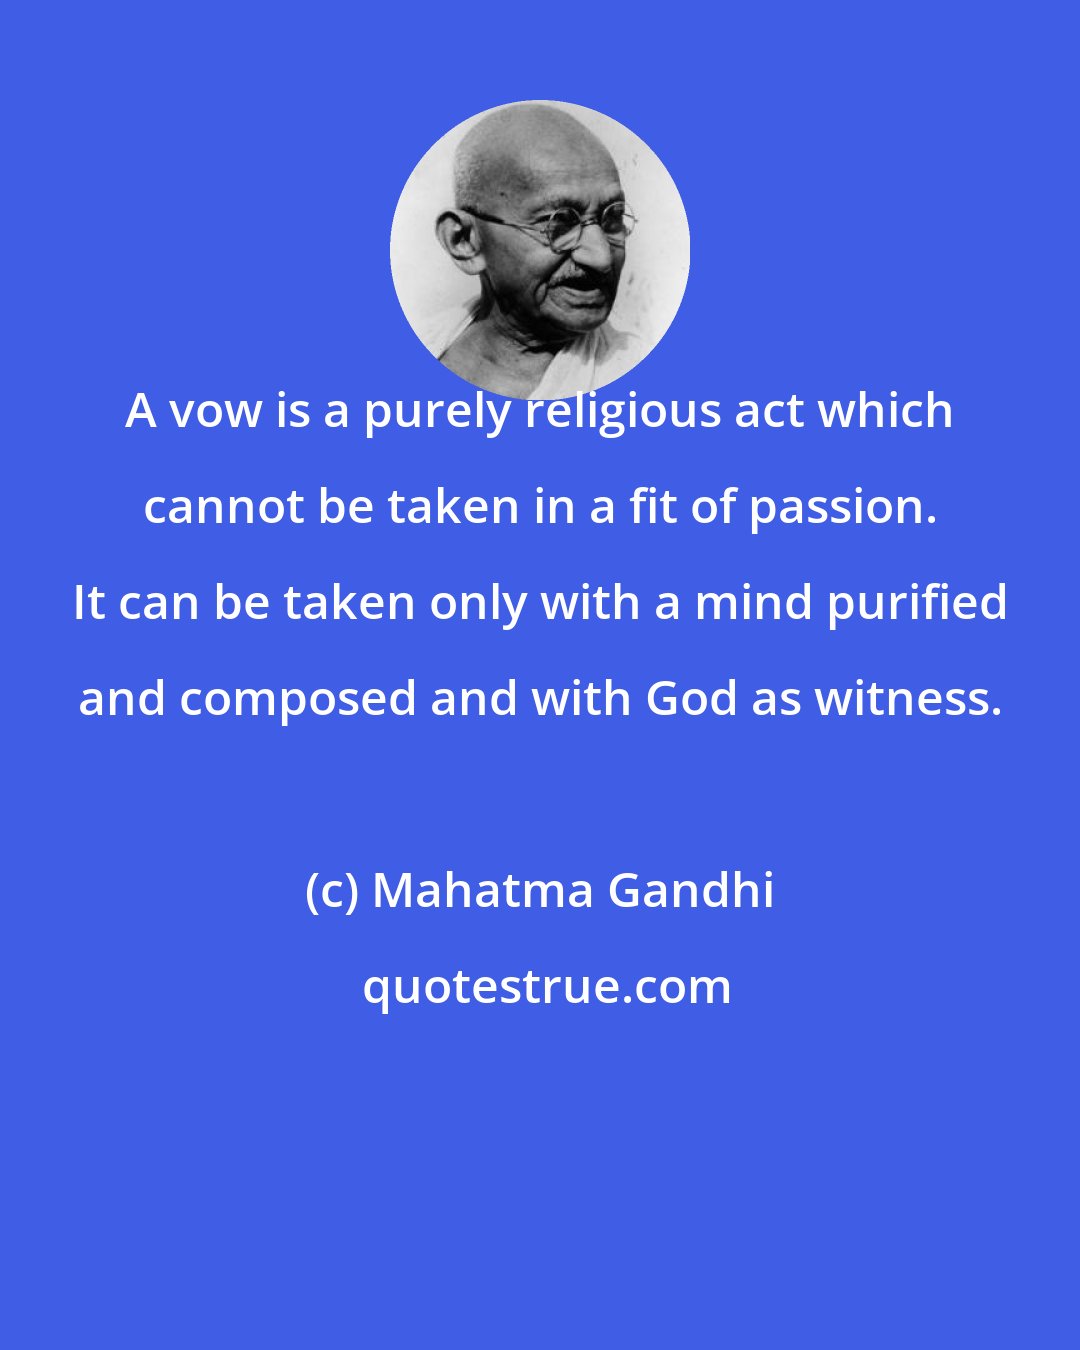 Mahatma Gandhi: A vow is a purely religious act which cannot be taken in a fit of passion. It can be taken only with a mind purified and composed and with God as witness.